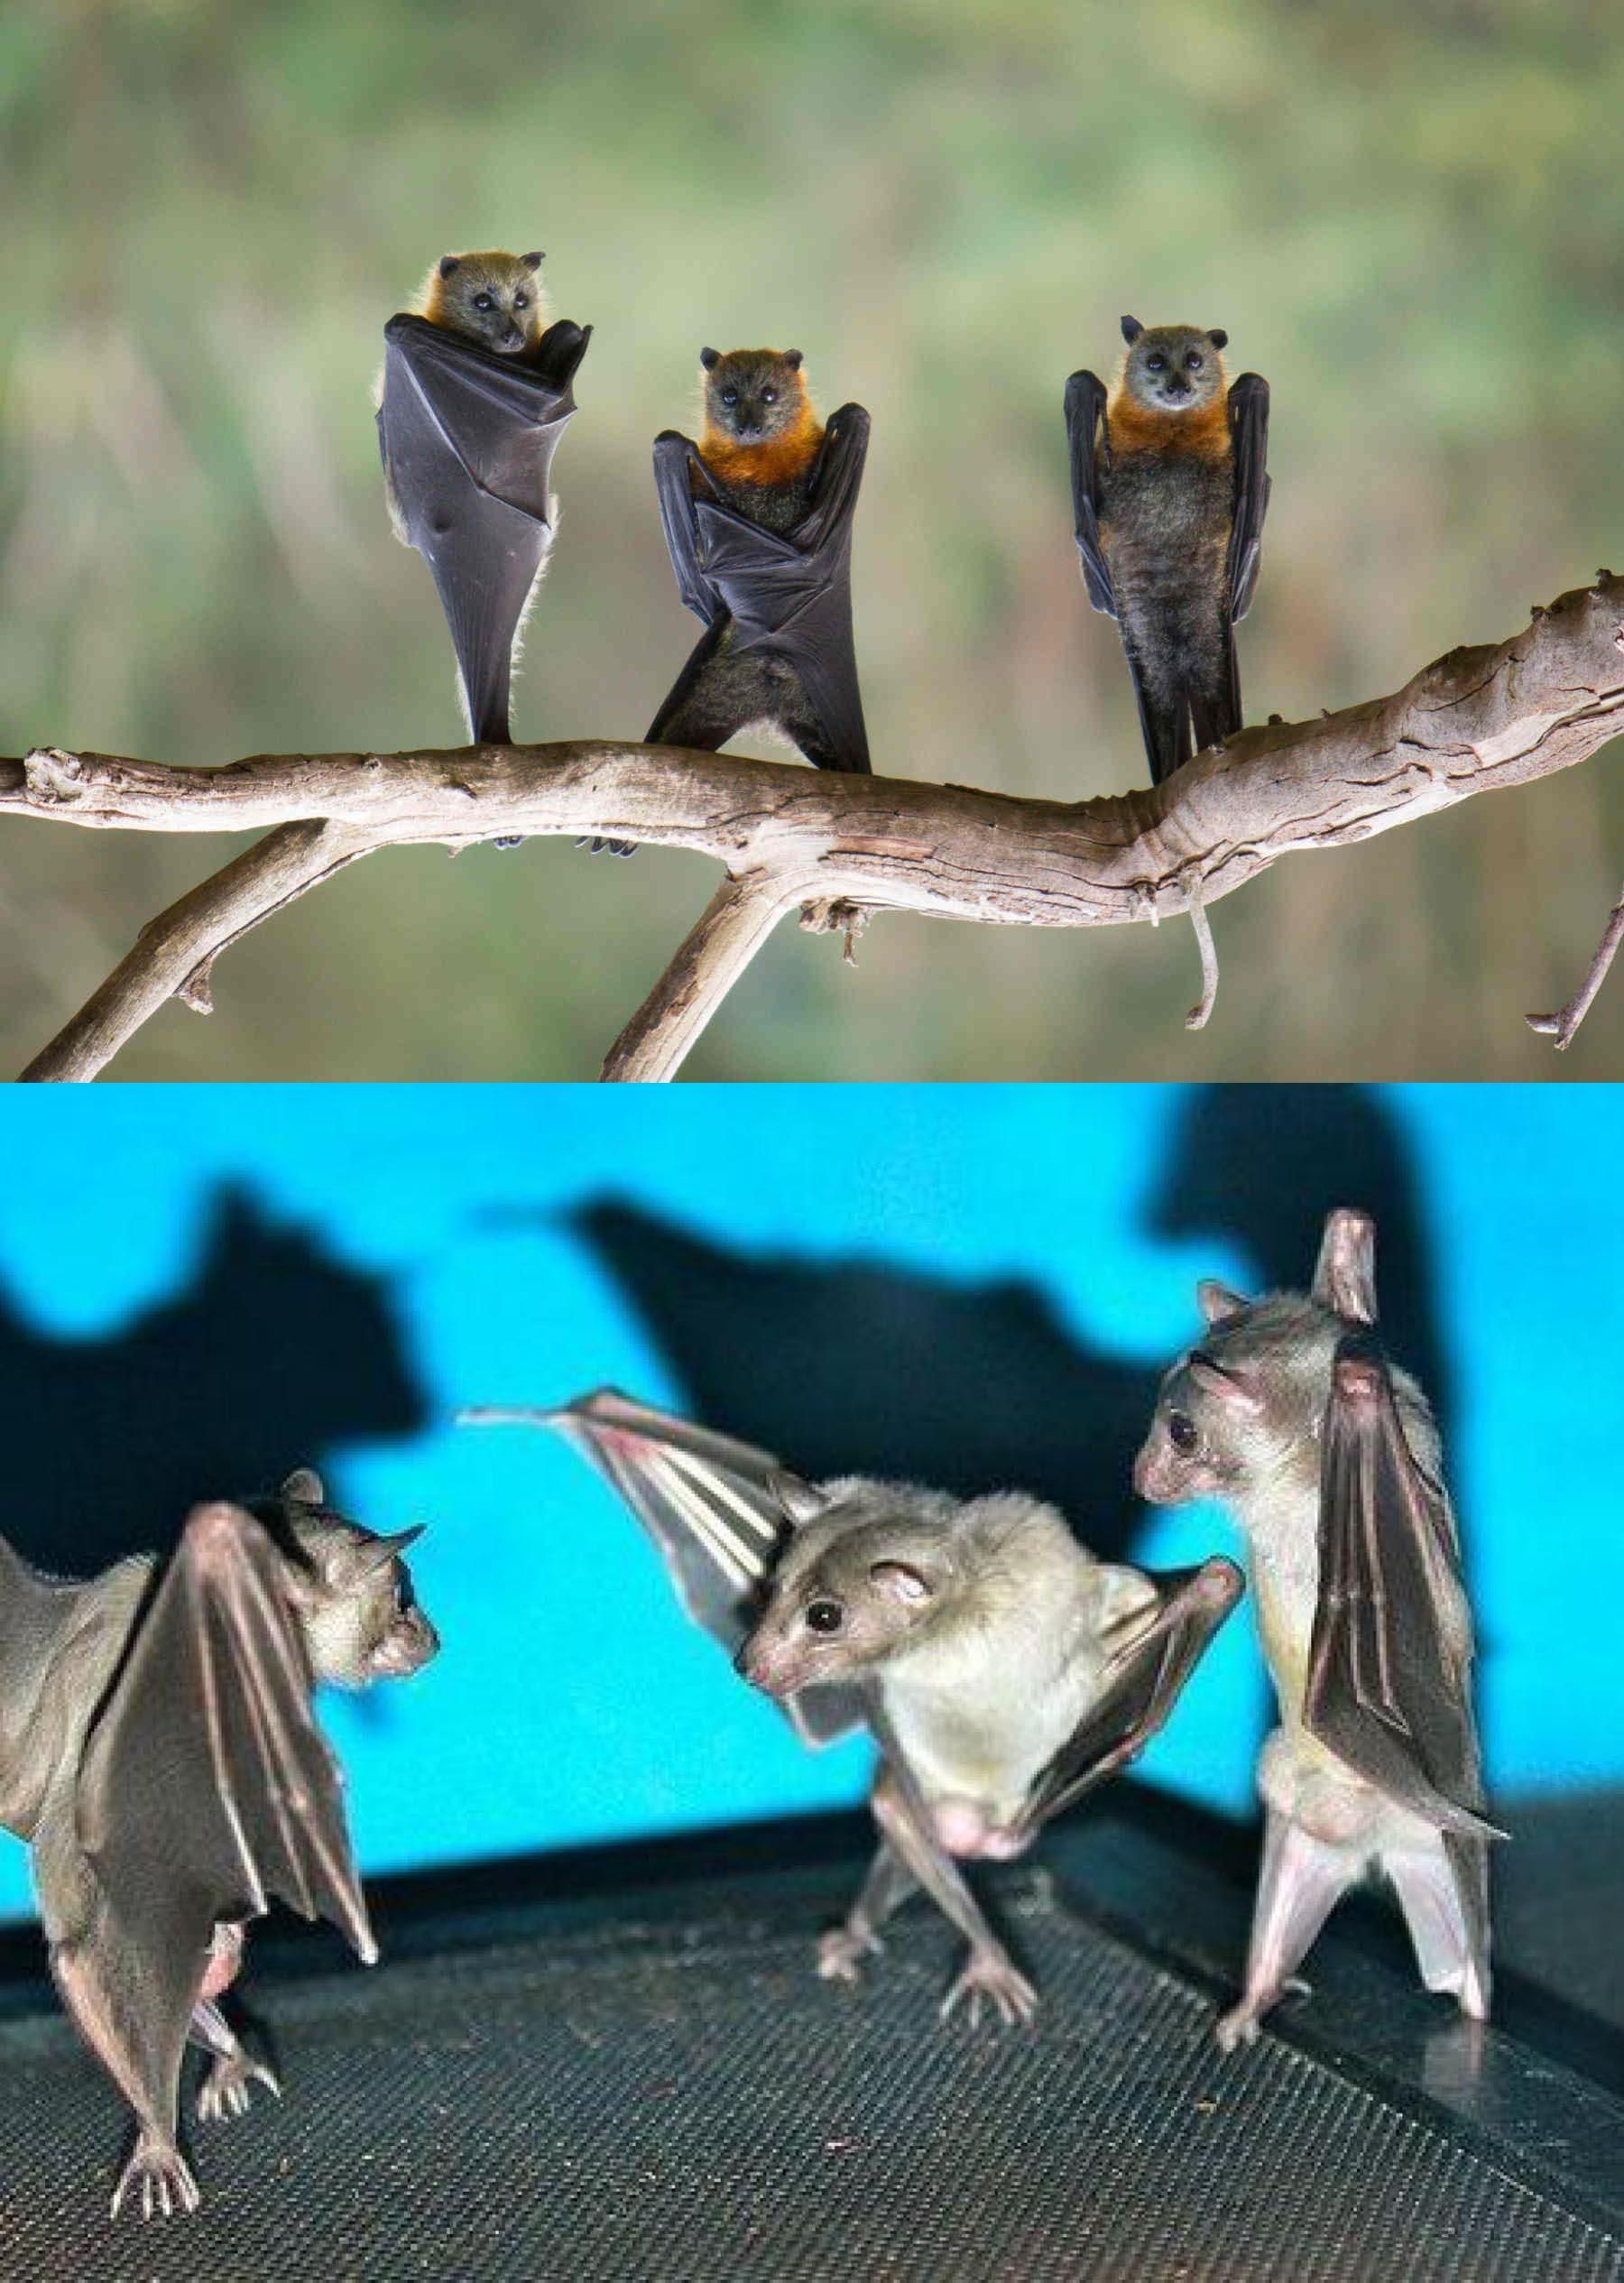 If you turn around pictures of bats hanging they look all gangsta